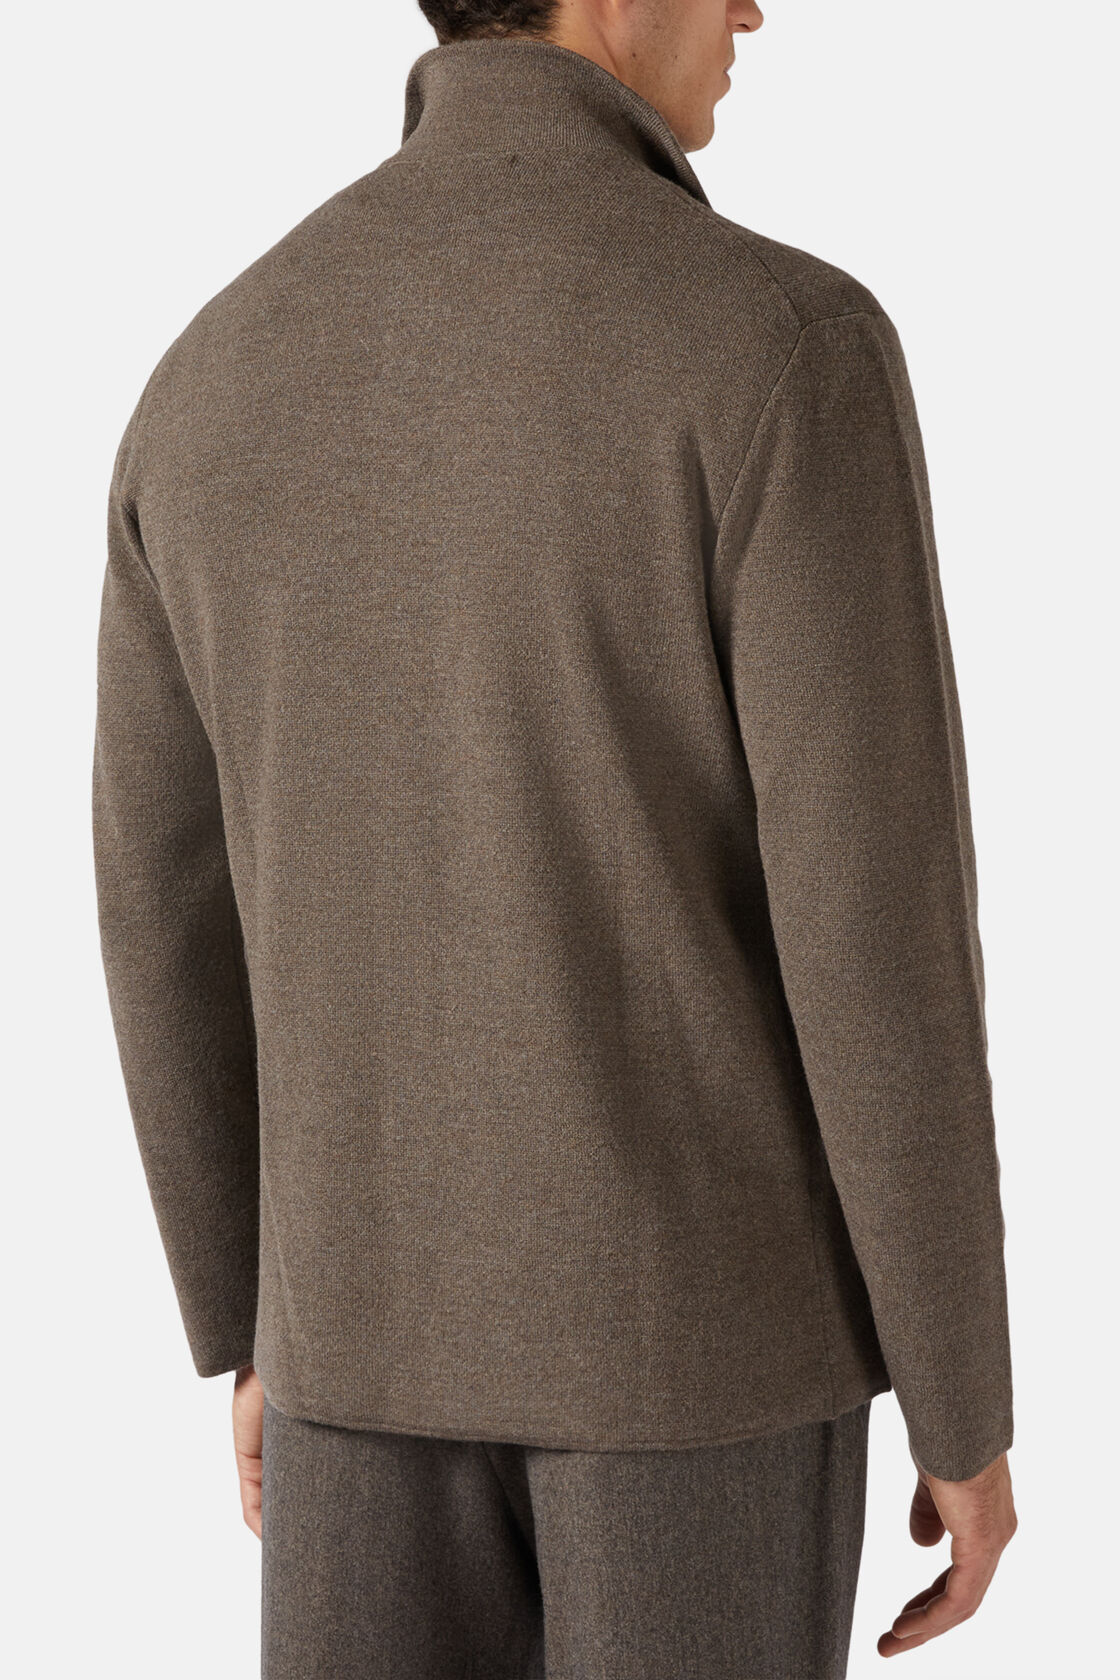 Dove Grey Over Shirt in Merino Wool, Taupe, hi-res